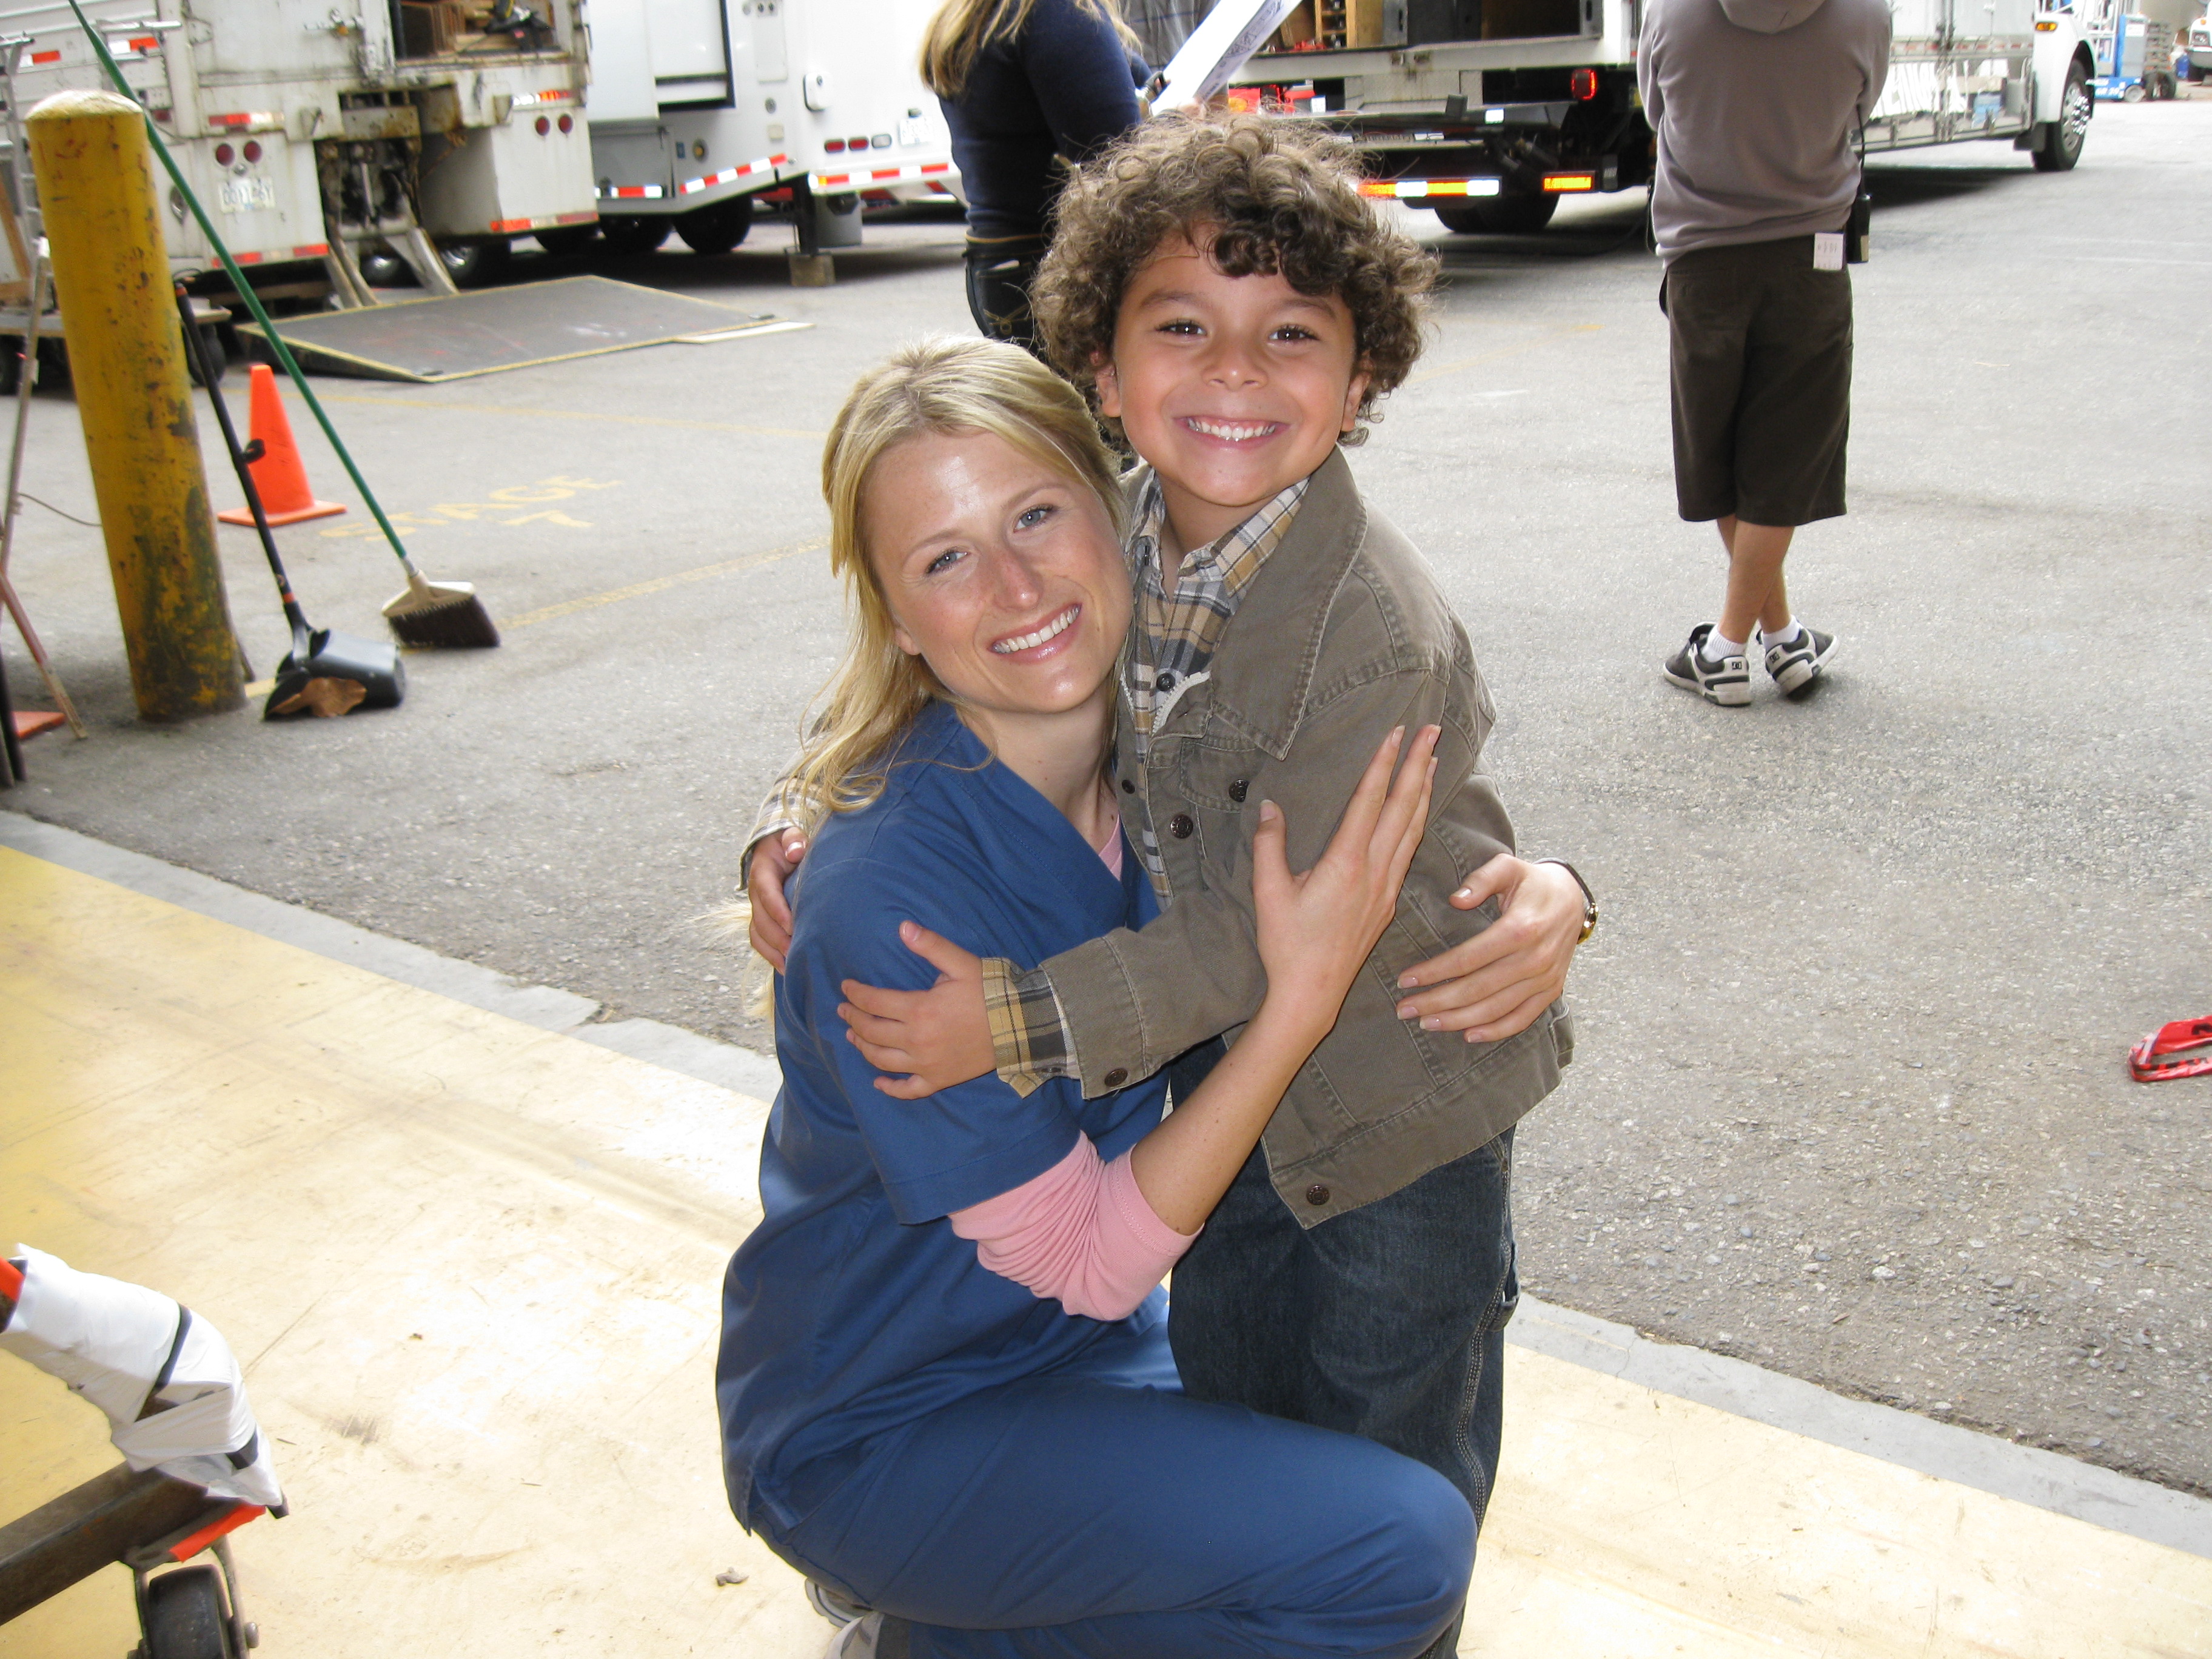 Bruce onset of Emily Owens with Mamie Gummer